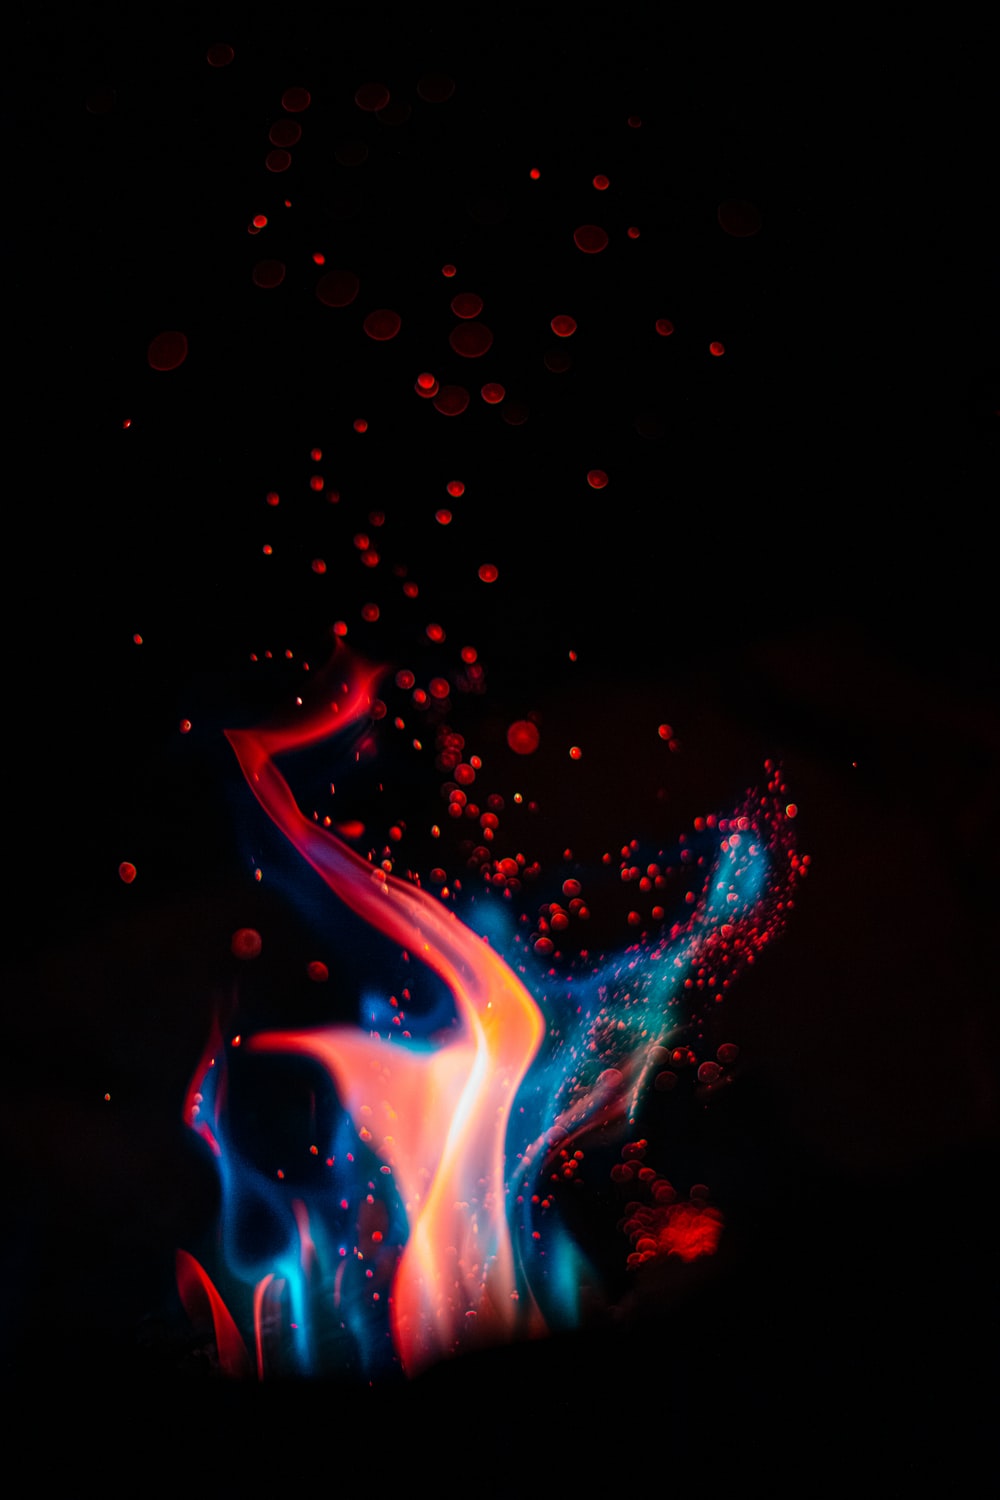 Fire Background Picture. Download Free Image